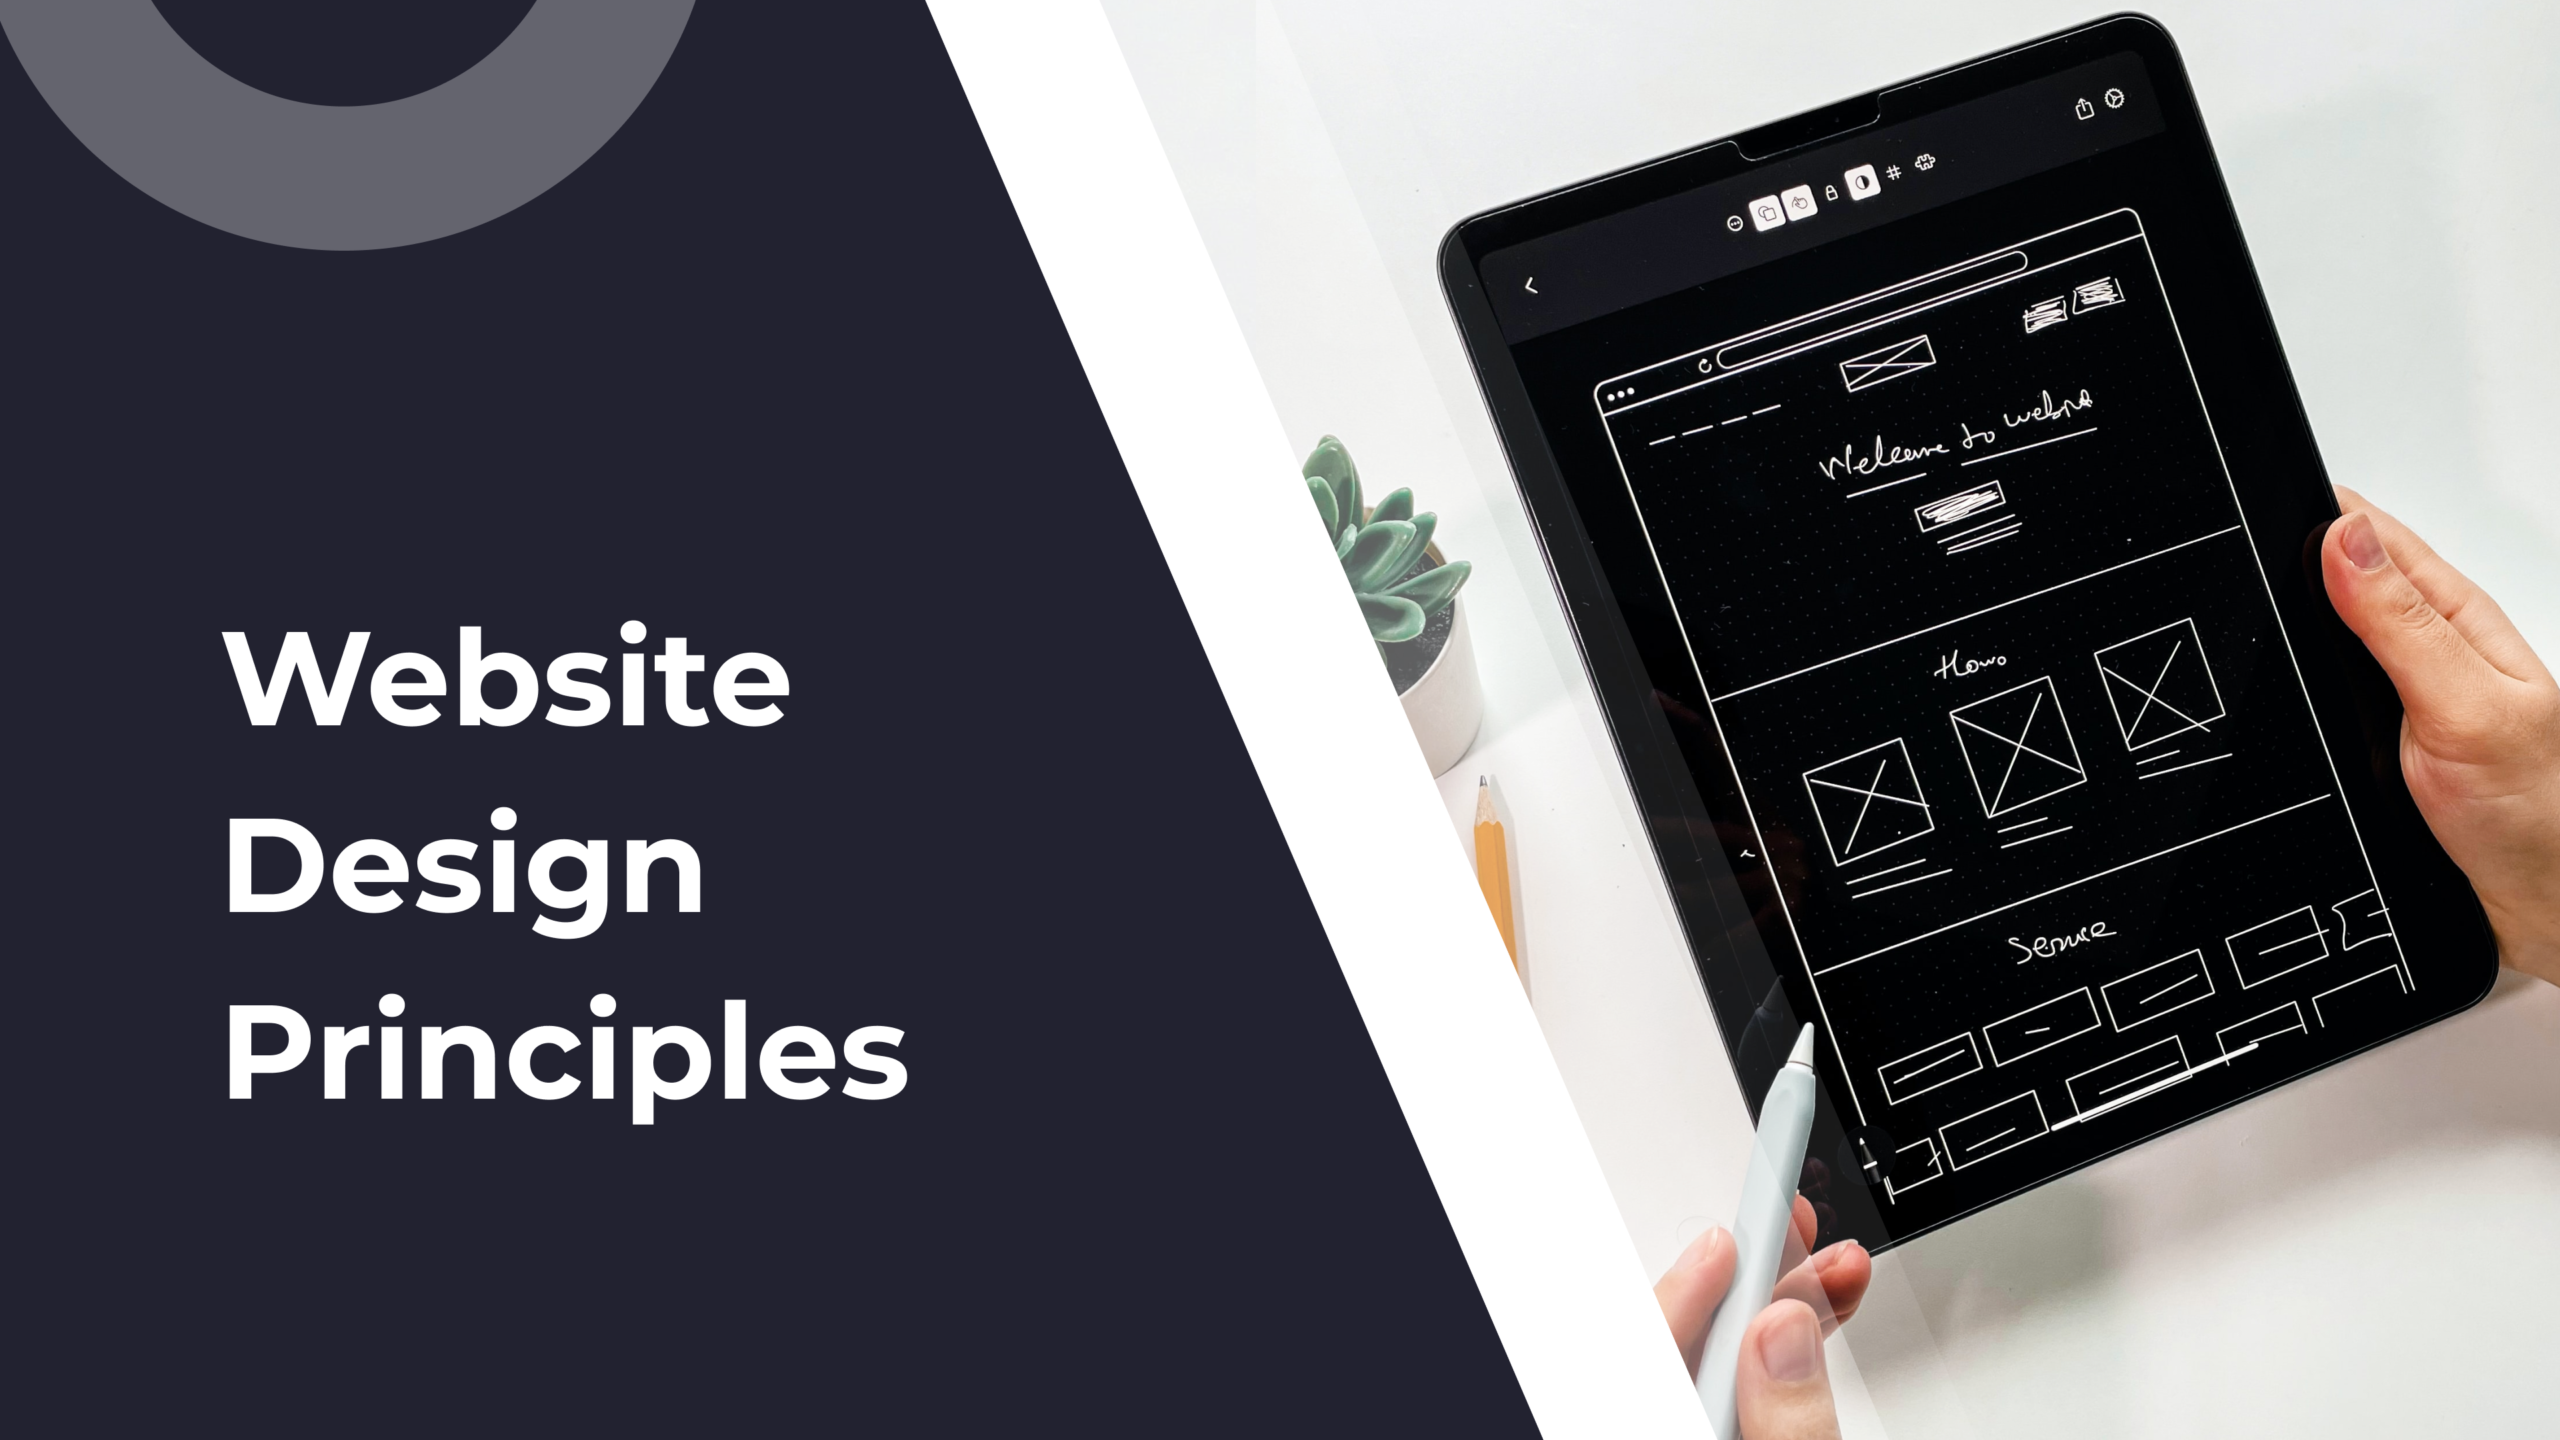 7 Website Design Principles that Help Ensure Customer Experience and Success